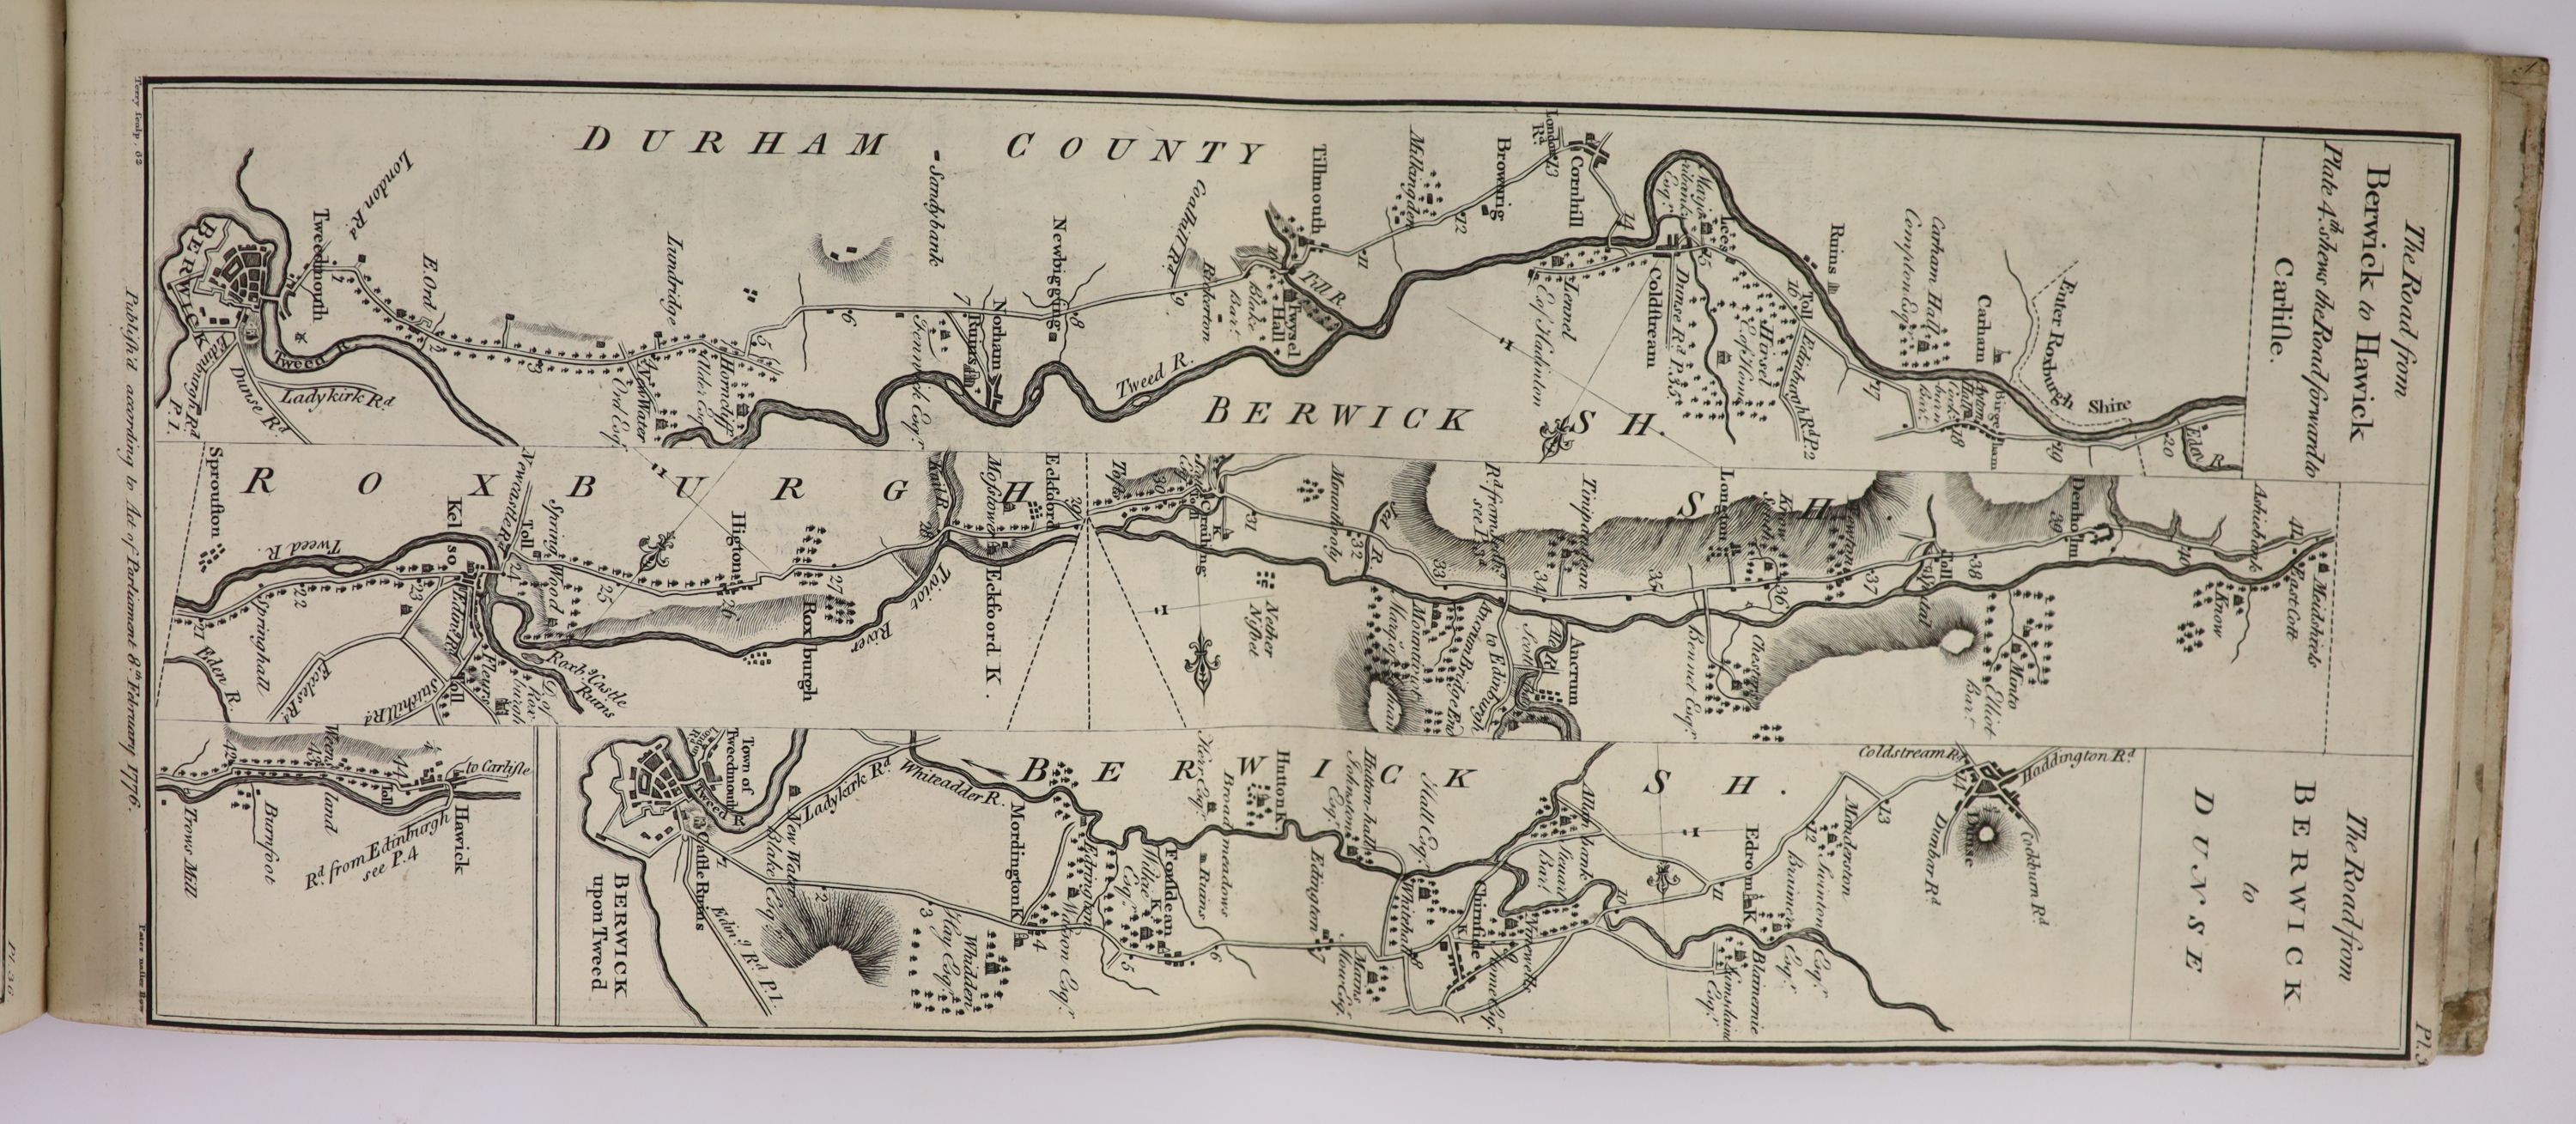 Taylor, George and Skinner, Andrew - Taylor and Skinner’s Survey and Maps of the Roads of North Britain, with 61 engraved strip maps, in ragged edged calf binding, London, 1776